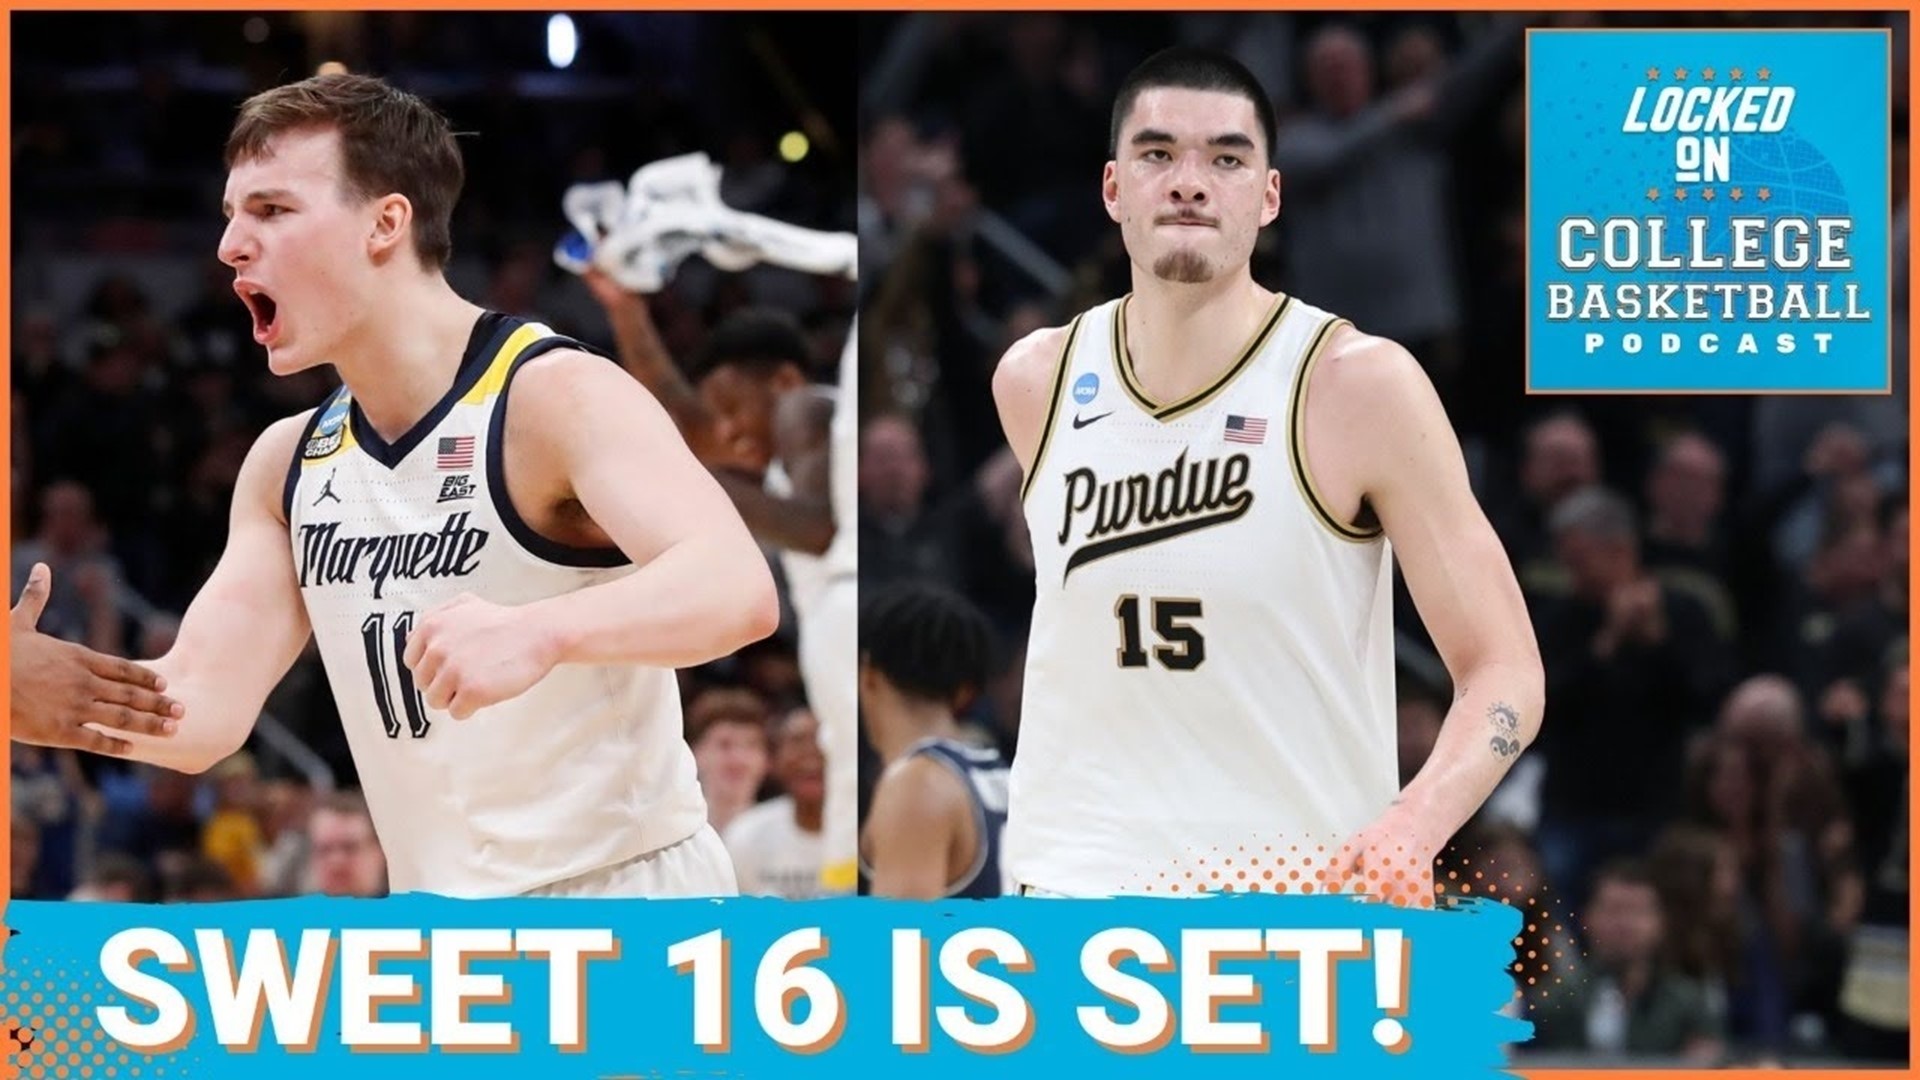 The Sweet 16 is set - Marquette and Colorado started day 4 with a bang, fueled by an elite point guard matchup between Tyler Kolek and KJ Simpson.